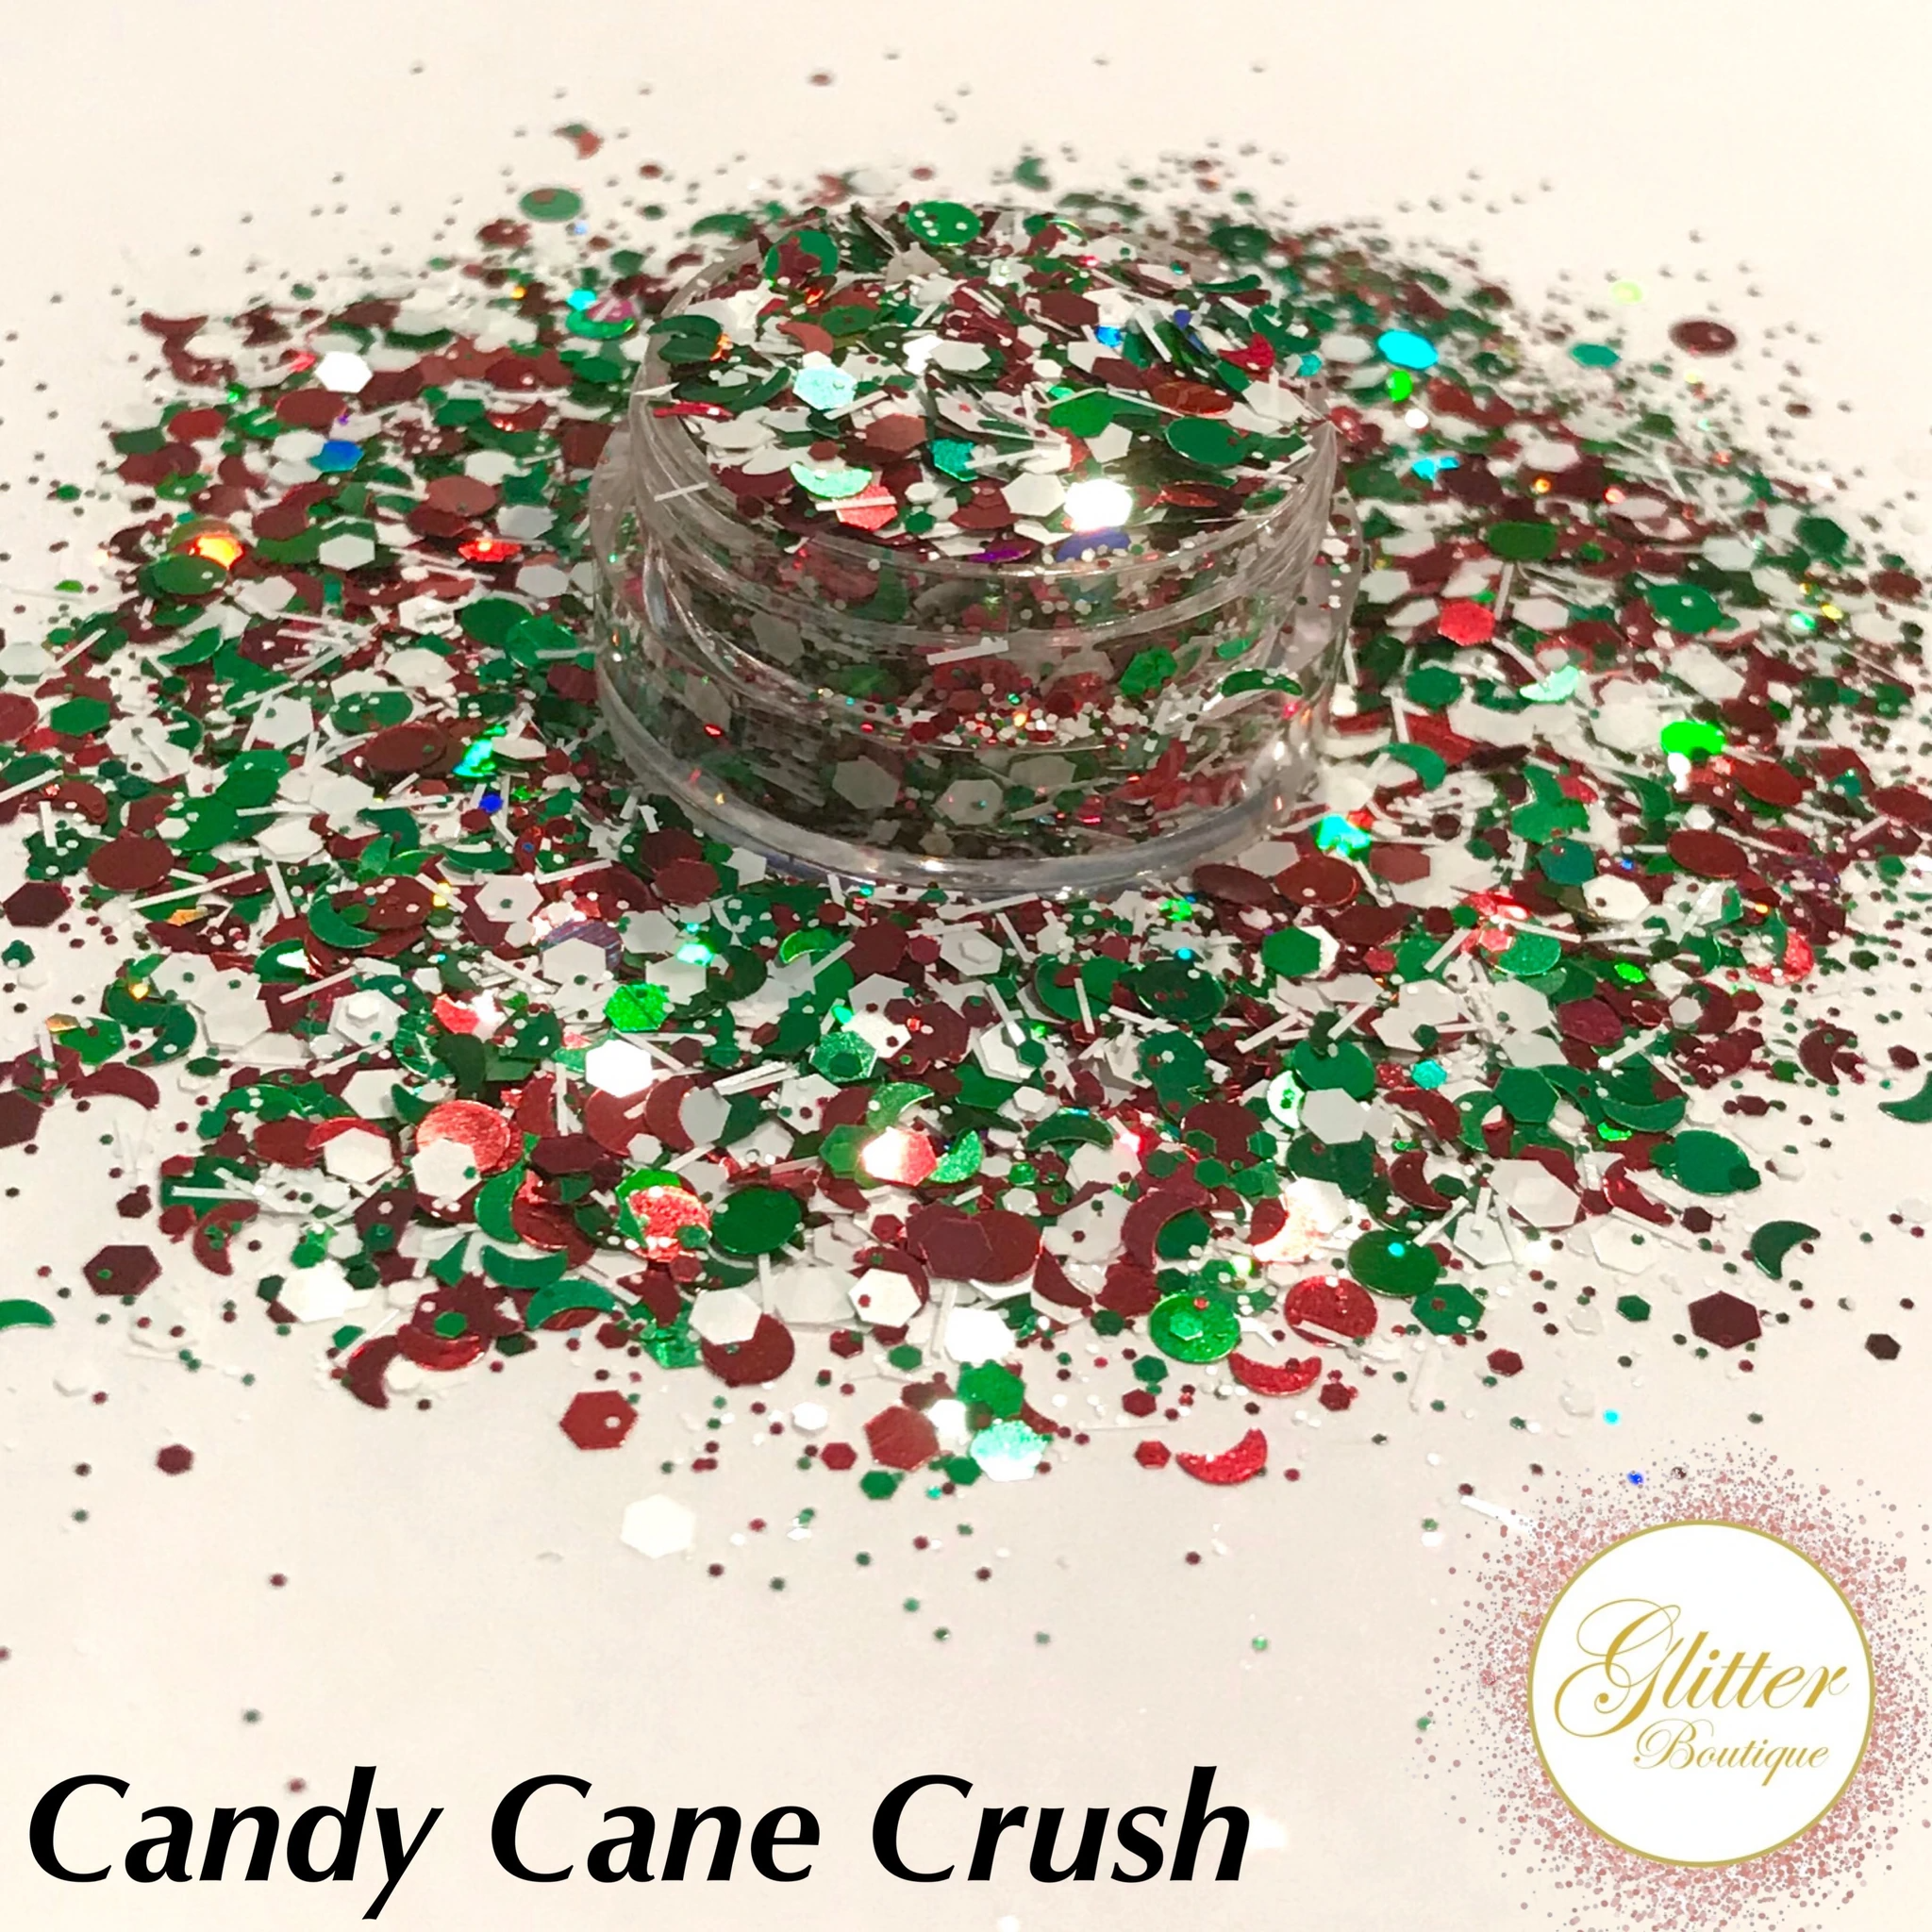 Glitter Boutique - Candy Cane Crush - Creata Beauty - Professional Beauty Products